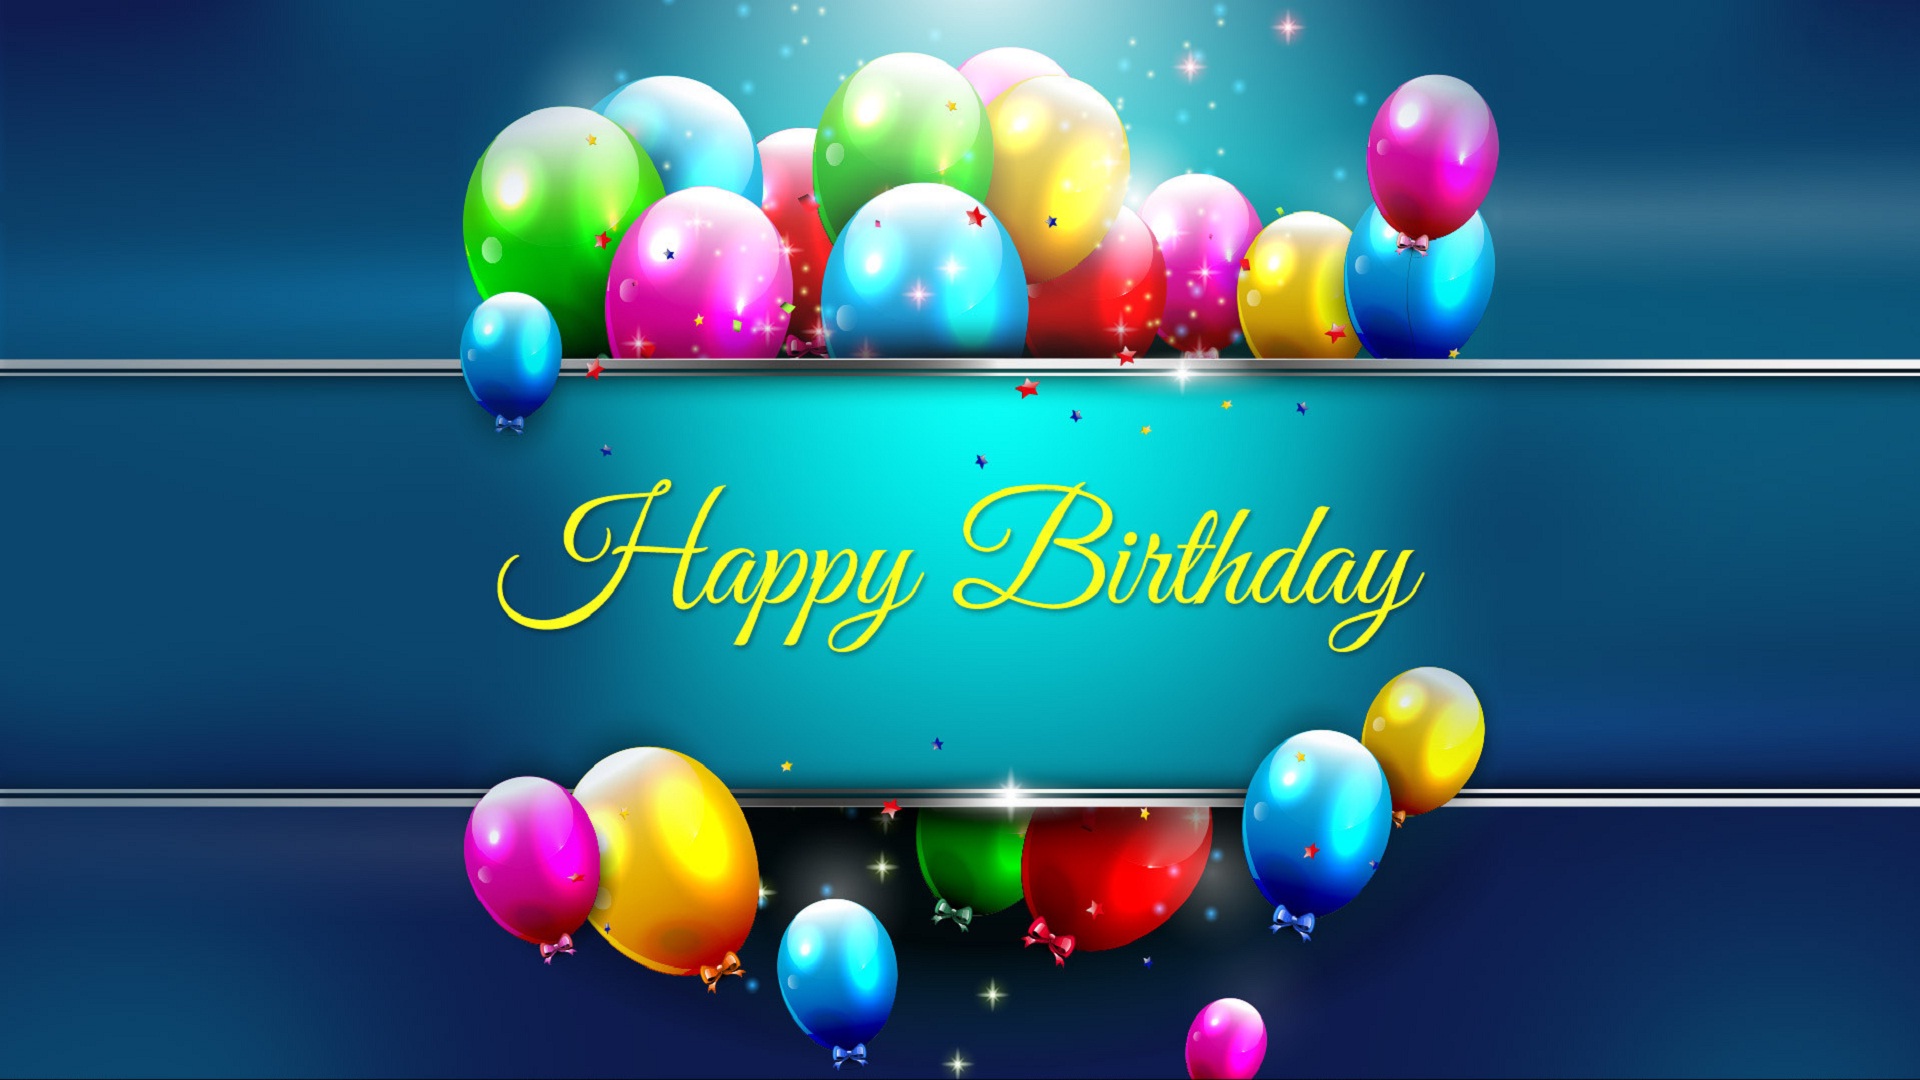 Free Download Happy Birthday Wallpaper High Quality Happy Birthday 19x1080 For Your Desktop Mobile Tablet Explore 76 Wallpaper Happy Birthday Funny Happy Birthday Wallpapers Free Birthday Wallpaper Backgrounds Happy